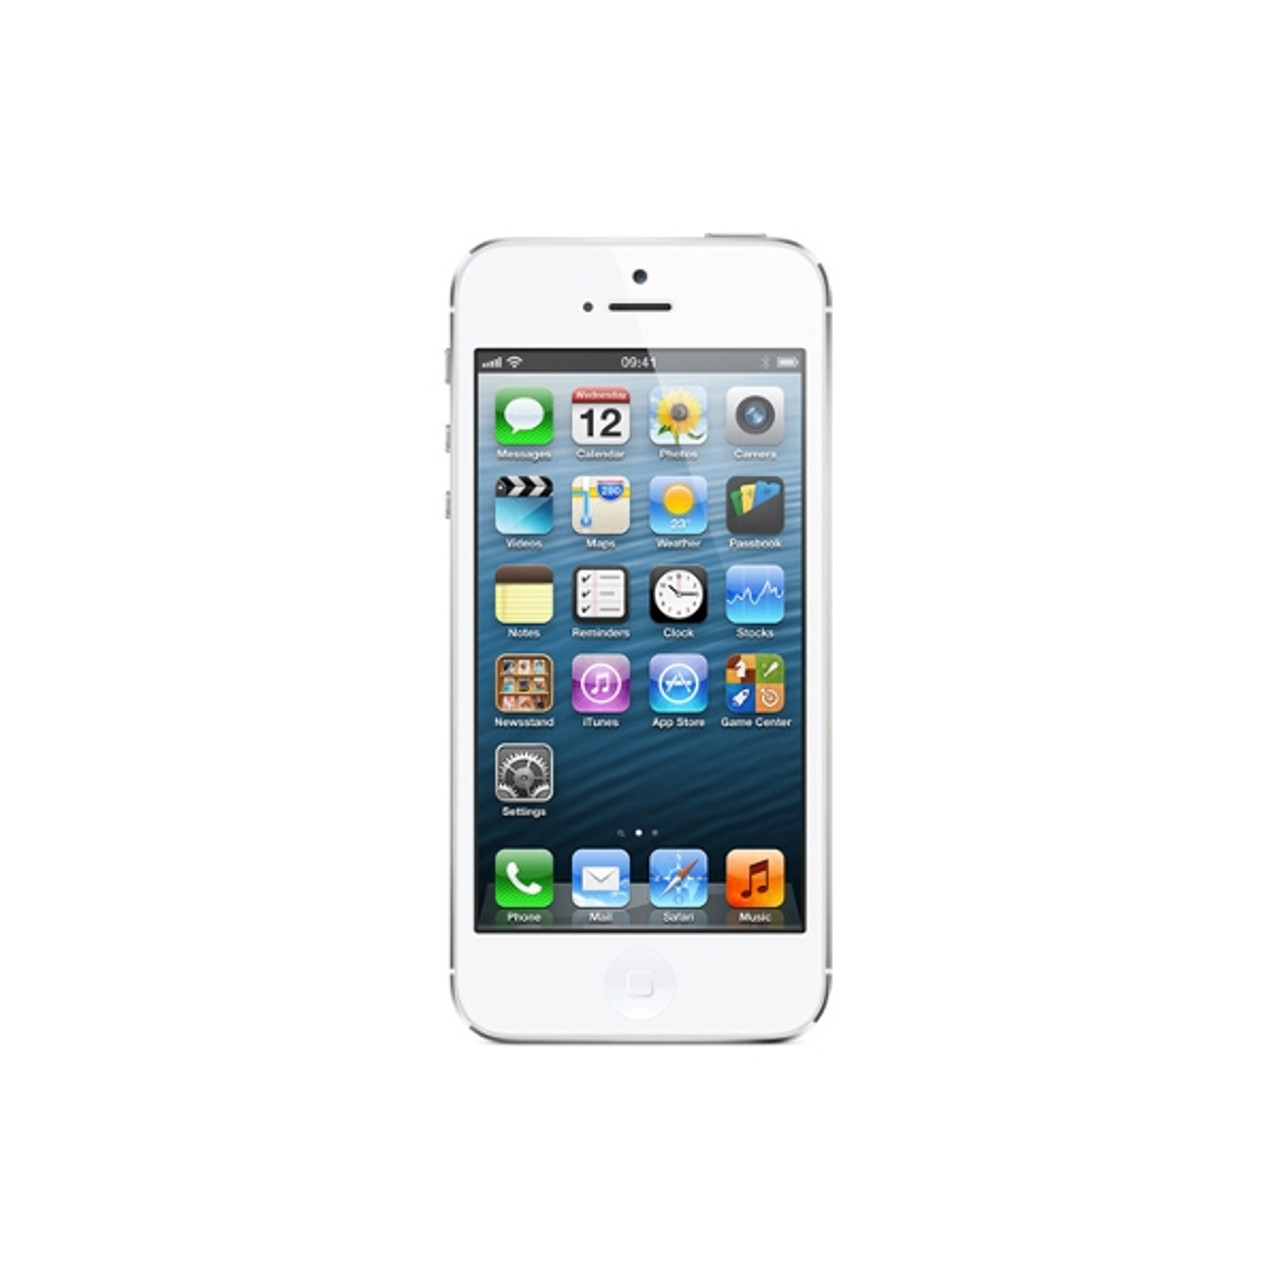 Apple iPhone 5 (AT&T) 16GB - White MD635LL/A - Good Condition